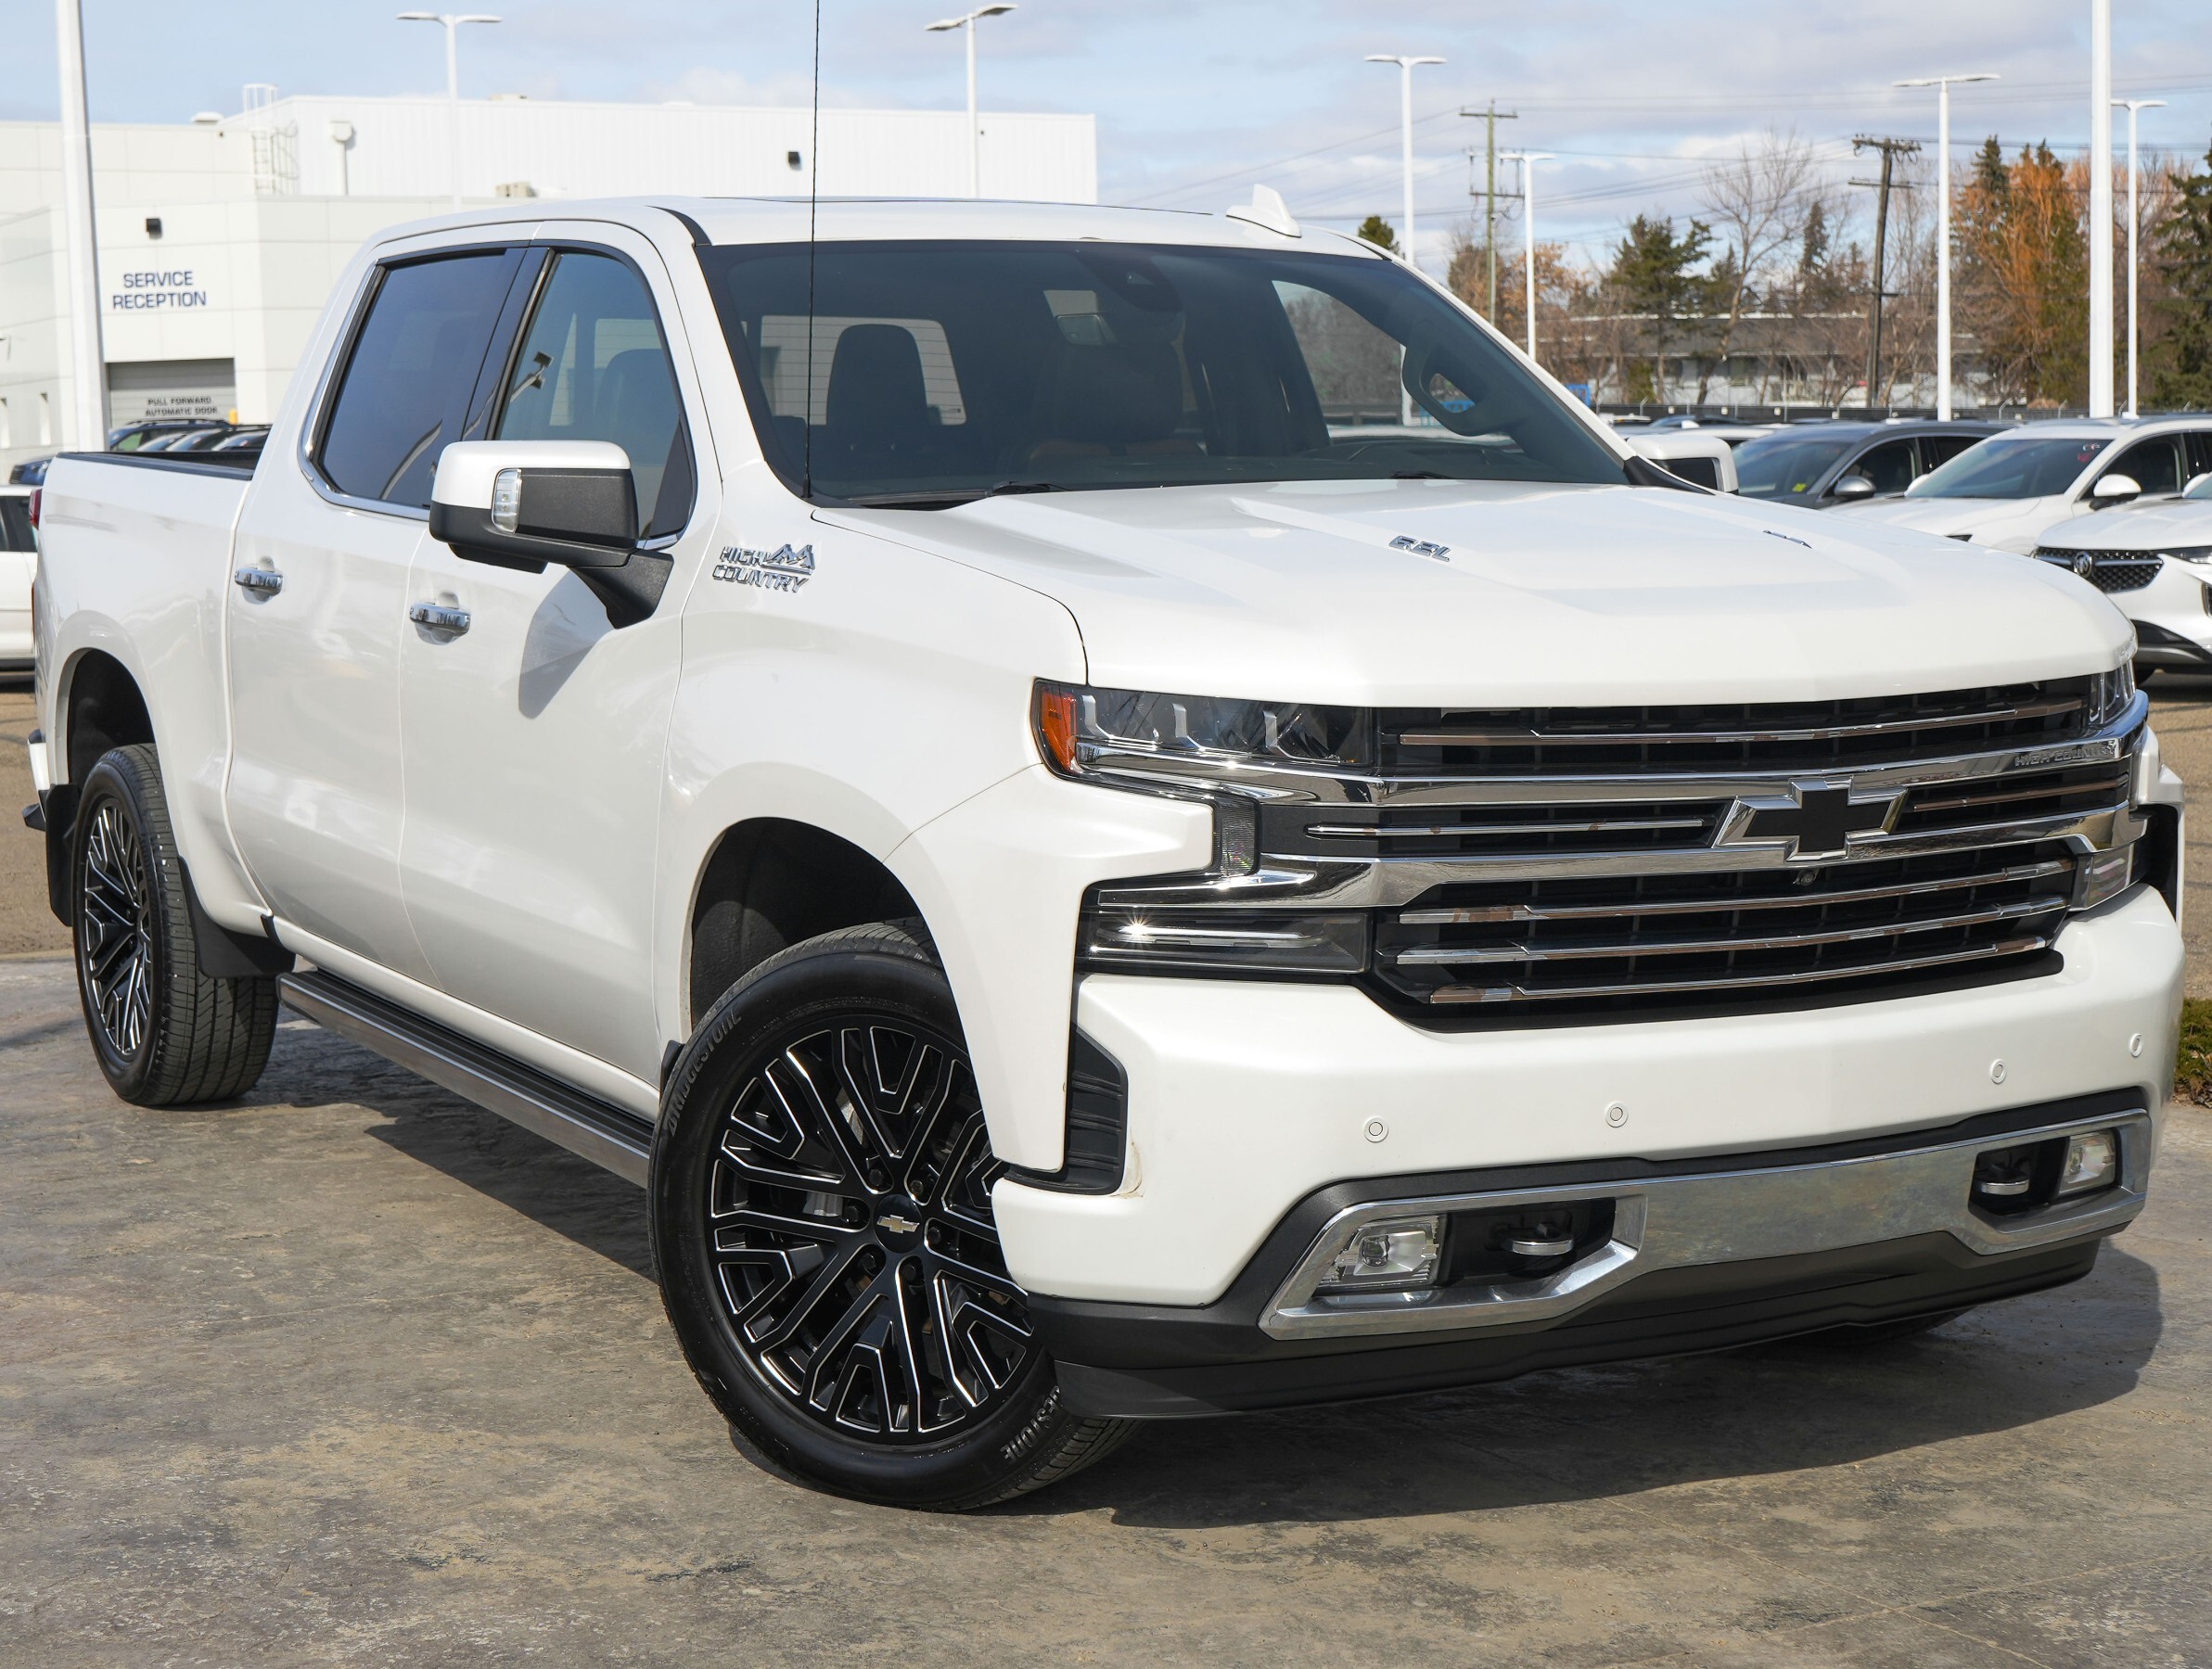 2019 Chevrolet Silverado 1500 High Country Deluxe Package, Nav, Leather, Sunroof